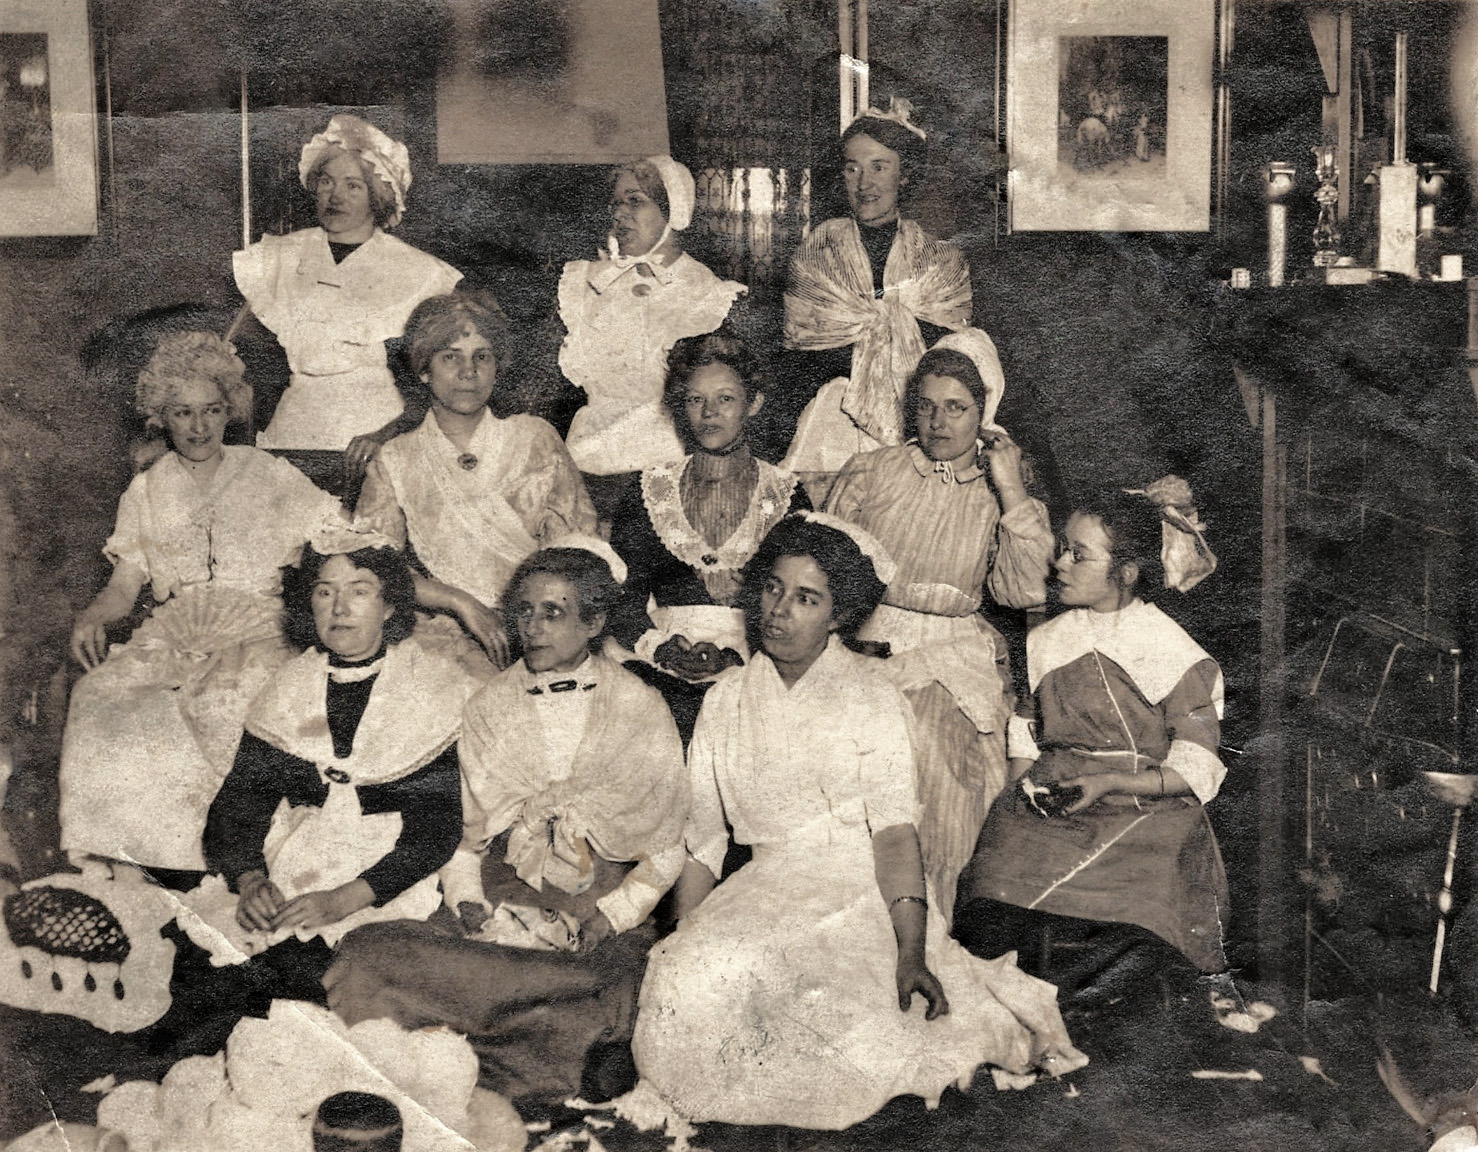 My great grandmother (center) either in Germany or Pennsylvania, I believe around 1900. View full size.